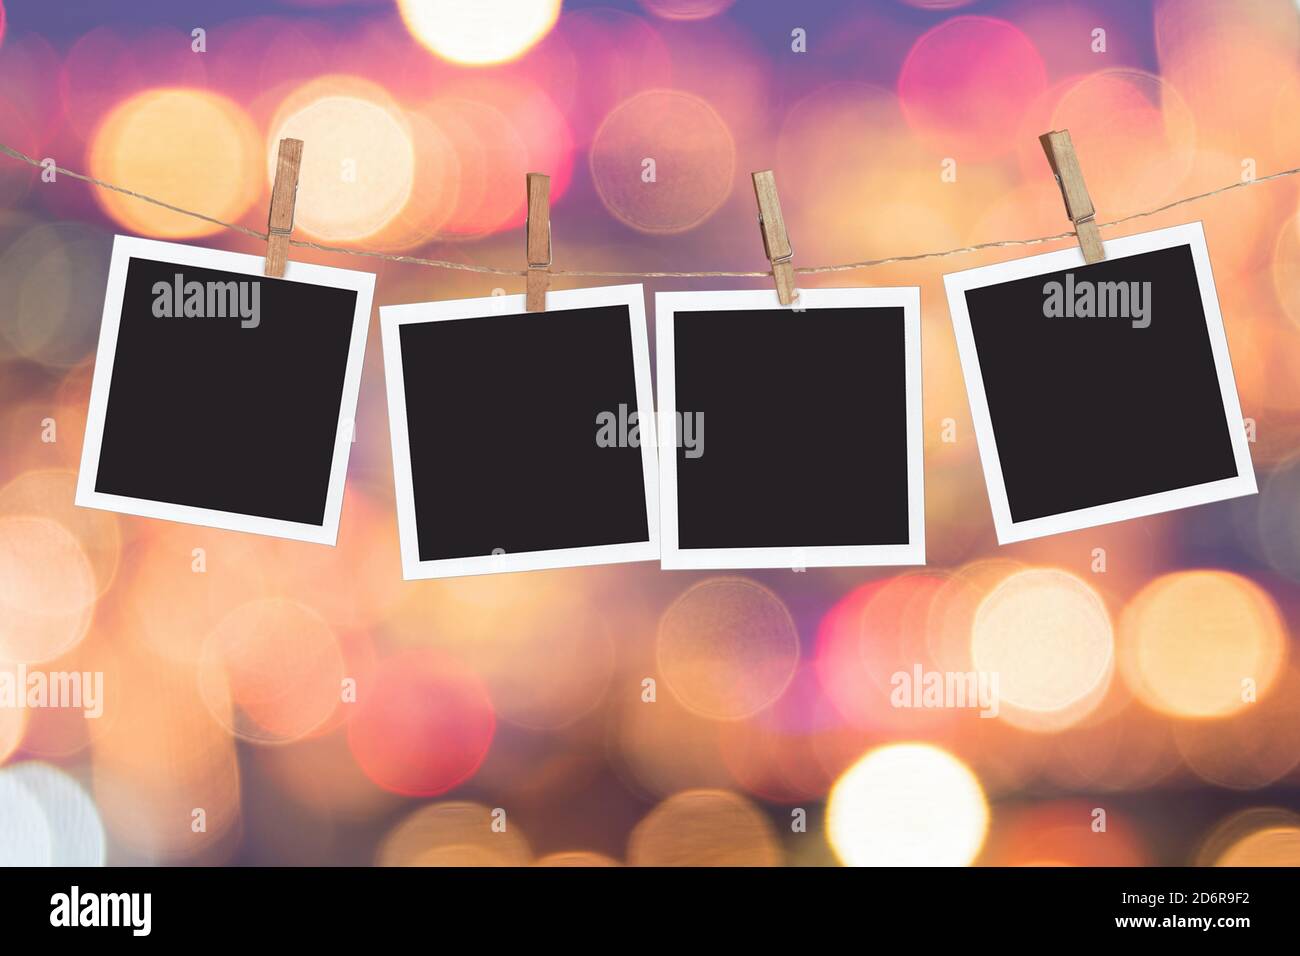 Four blank instant photo frames hanging on a rope, on holiday lights bokeh background Stock Photo